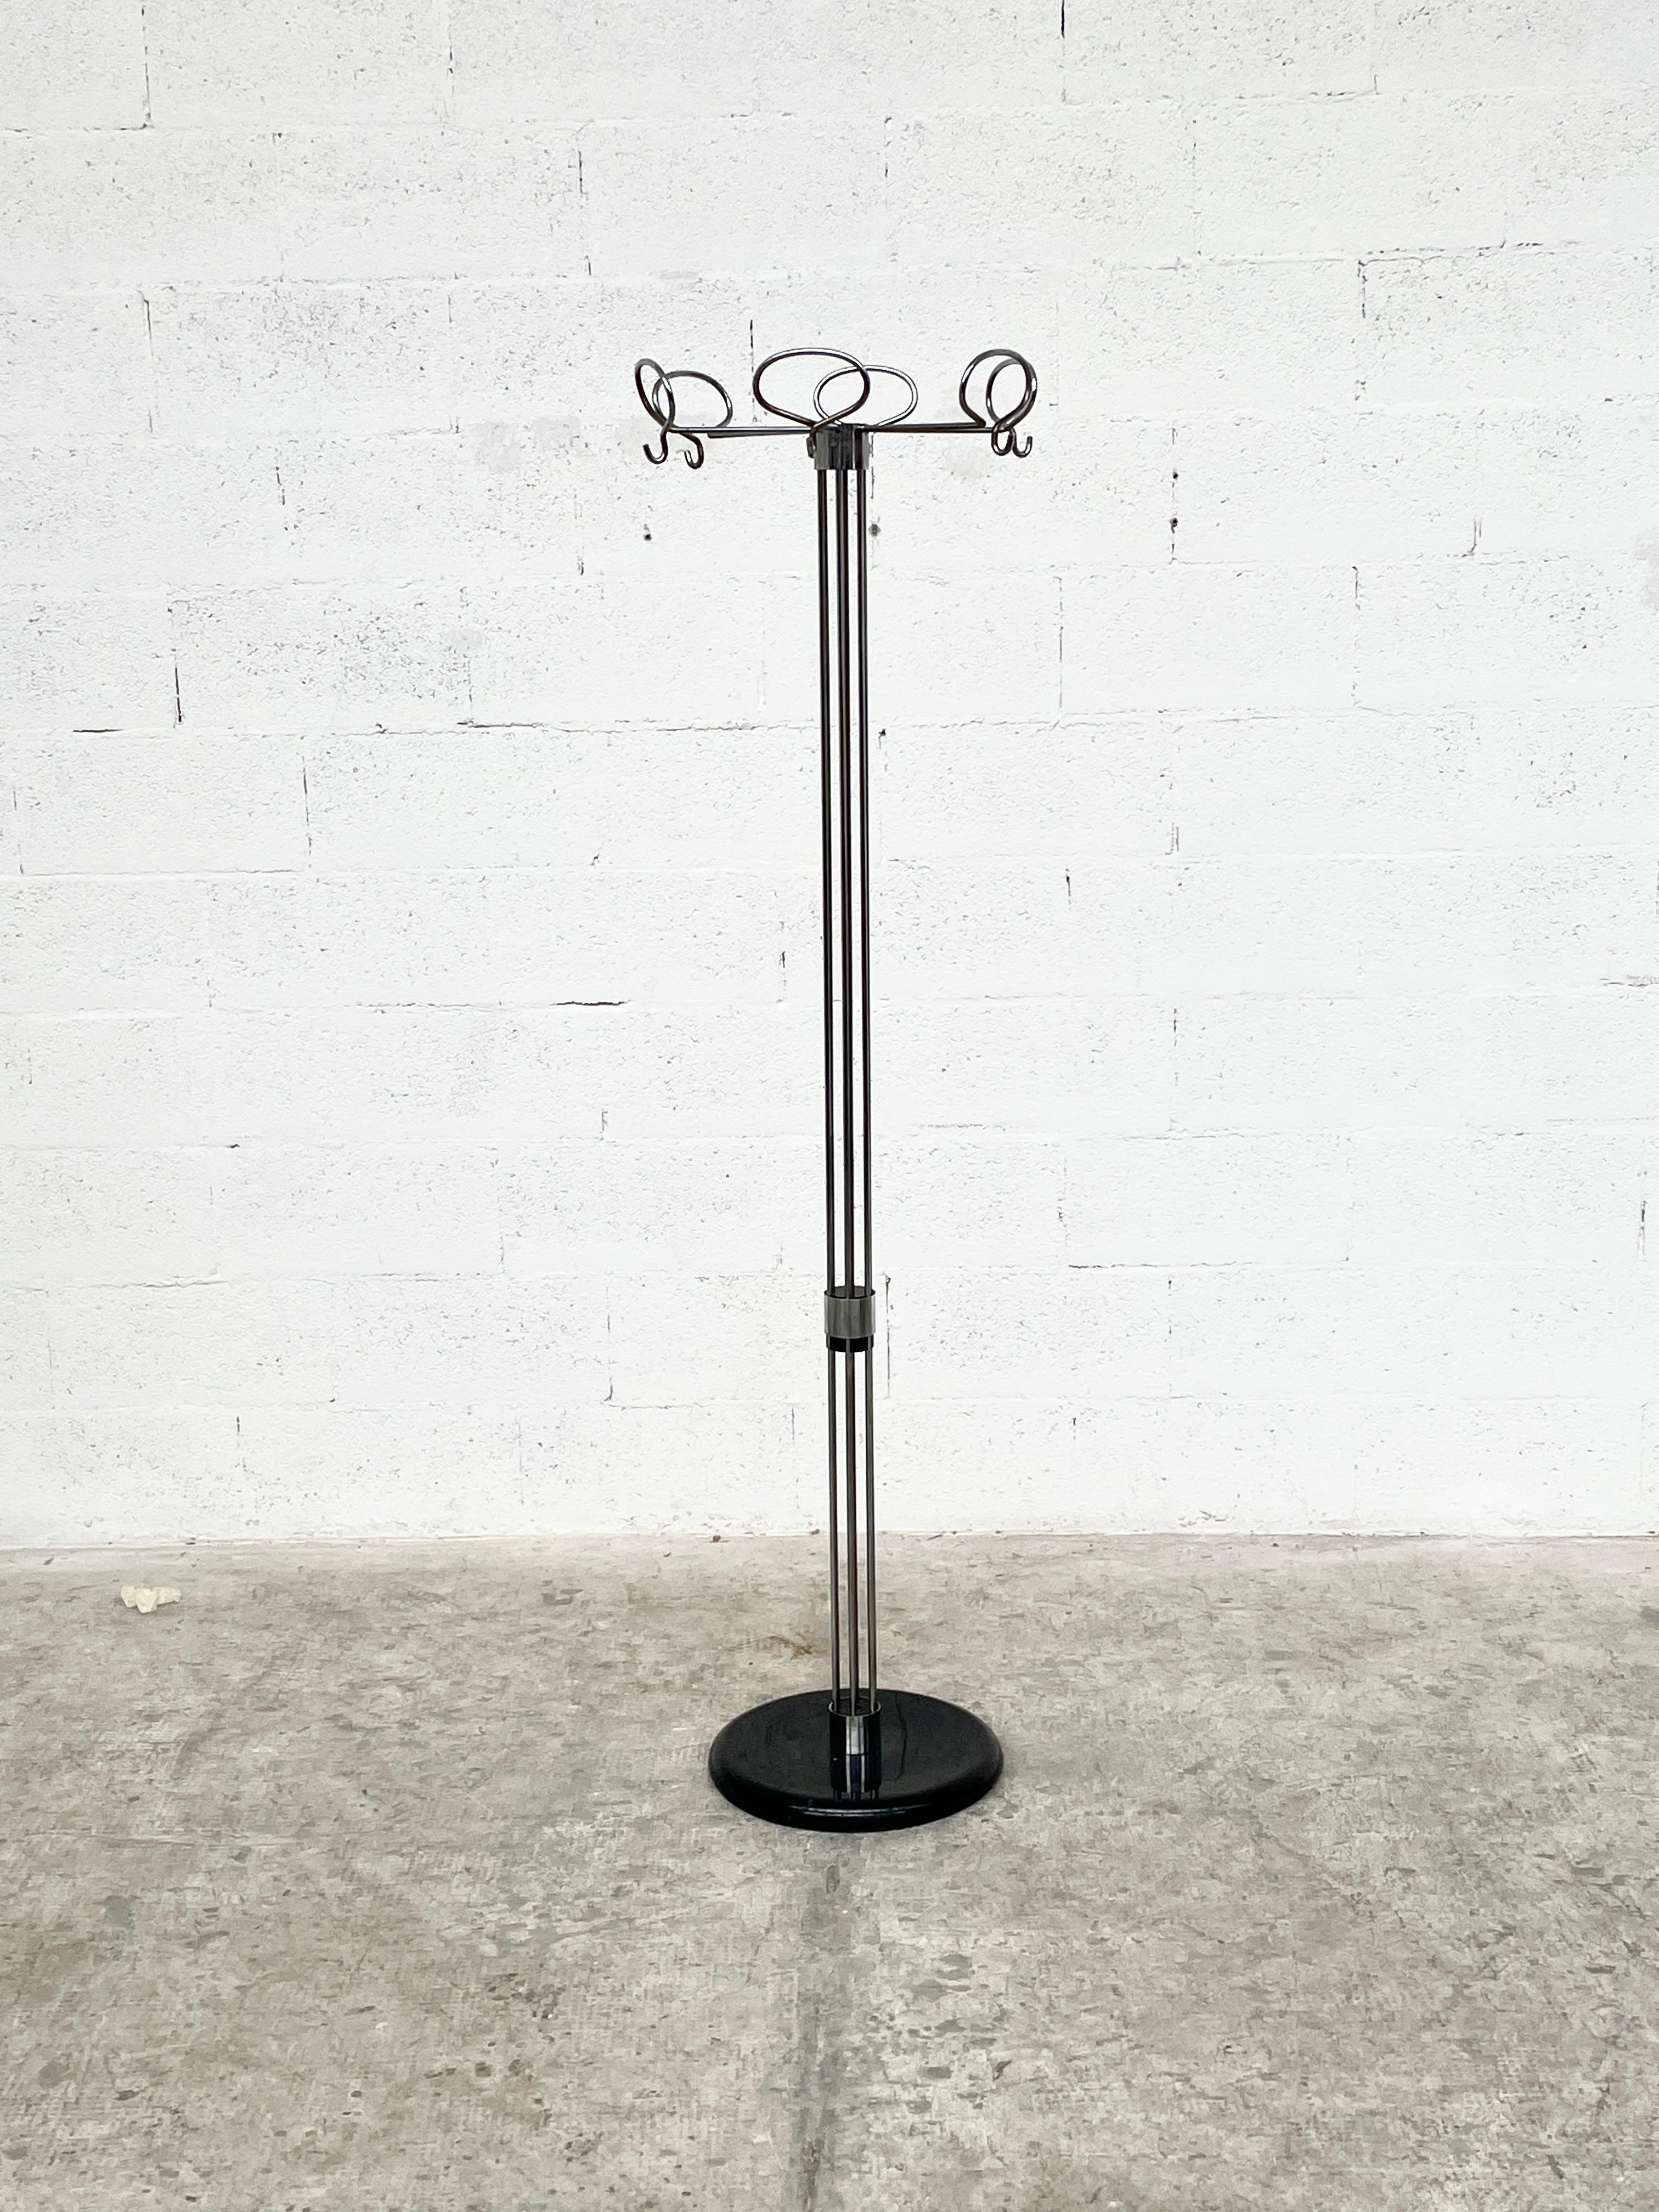 Chromed metal clothes hanger designed by Isao Hosoe and produced by Valenti 1970s.
Light and elegant essential lines.
Another one in black and one in white are available.
Dimensions: diameter 45 cm - Height 160 cm.